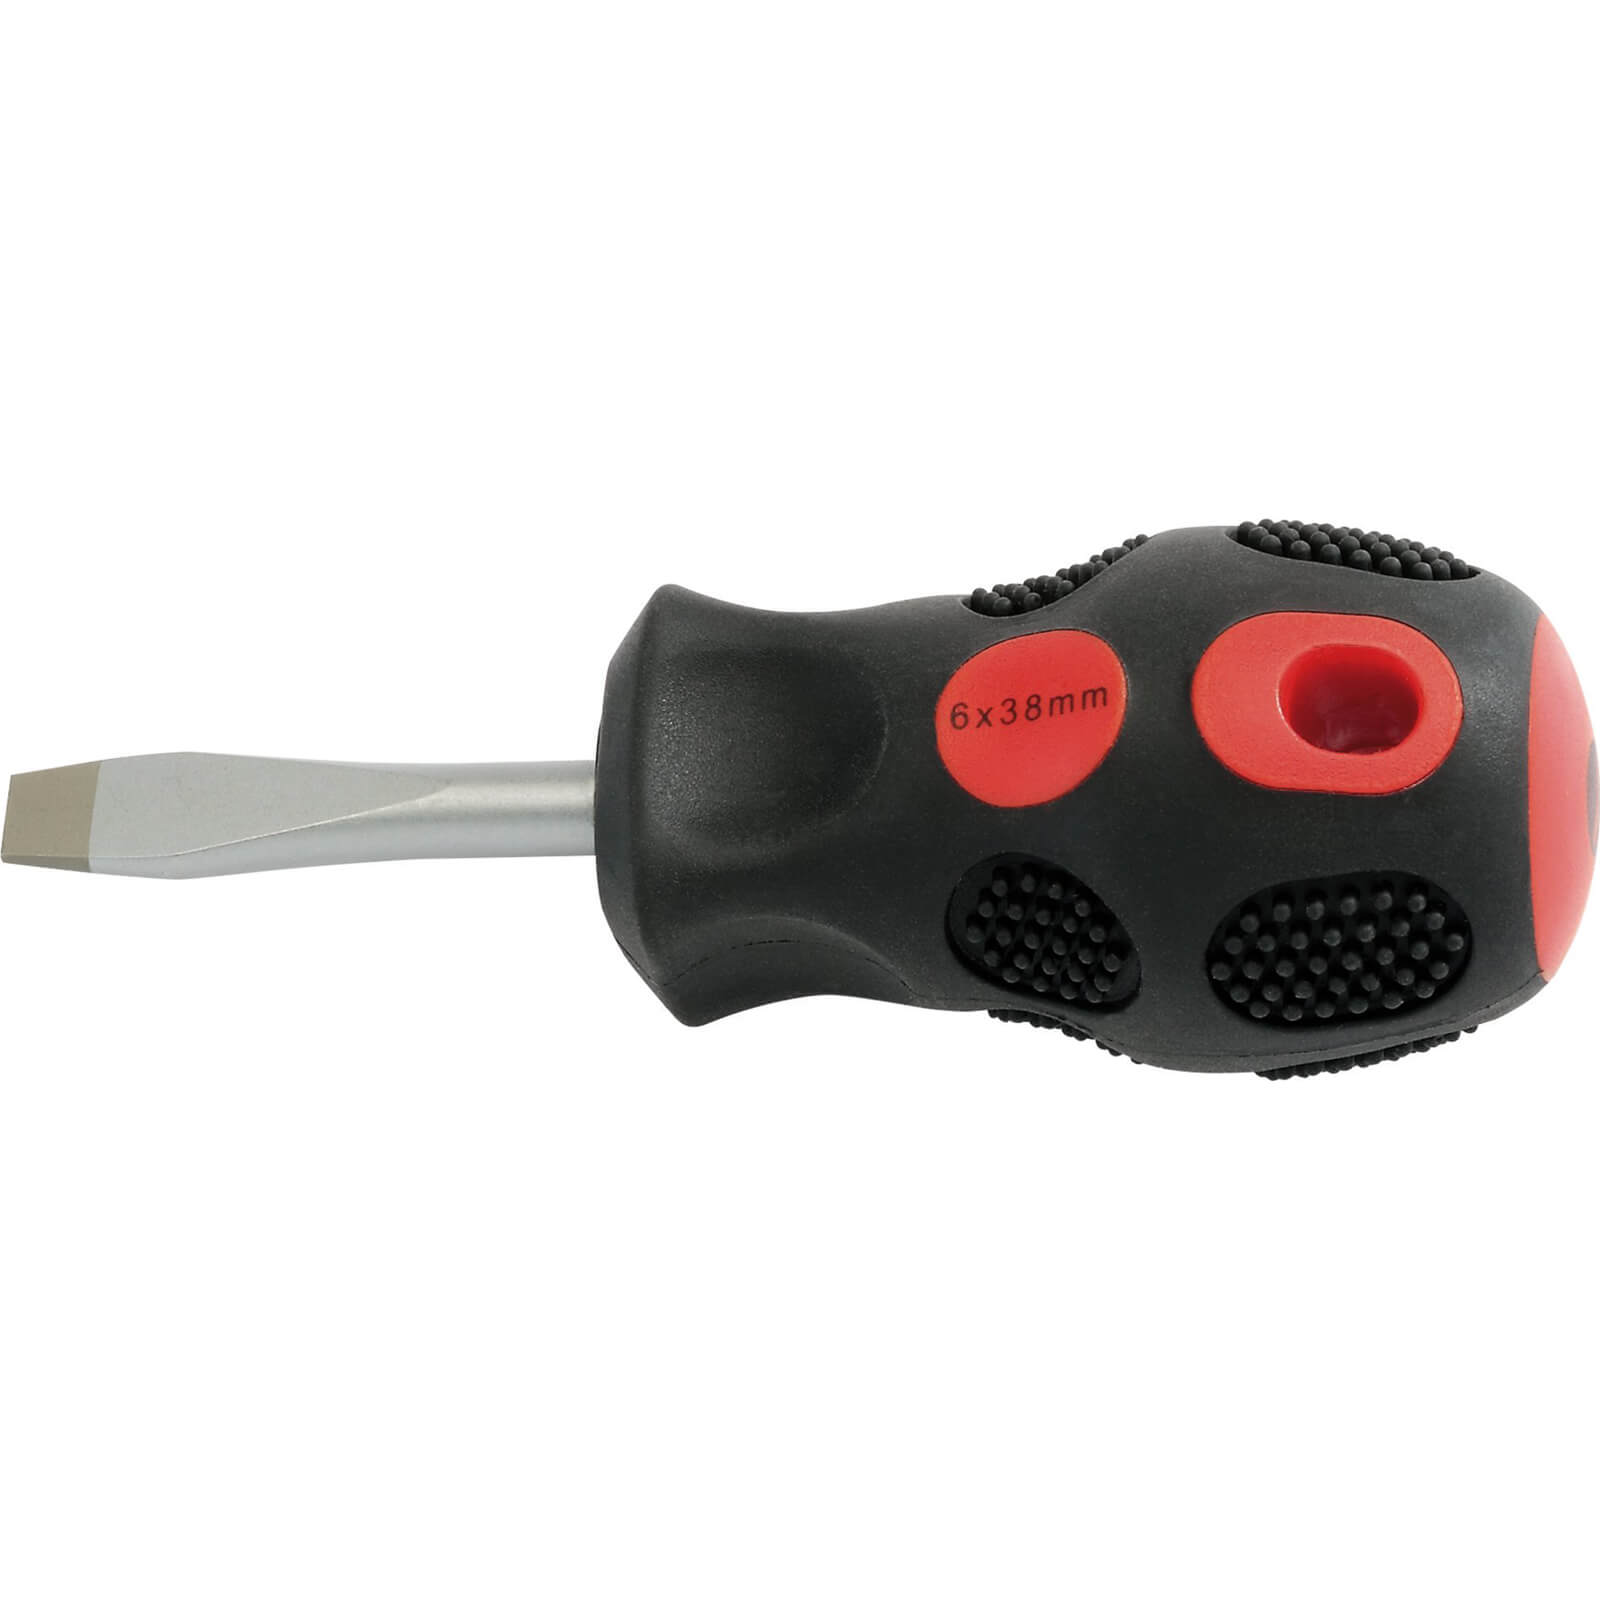 Image of Draper Expert Flared Slotted Screwdriver 6mm 38mm